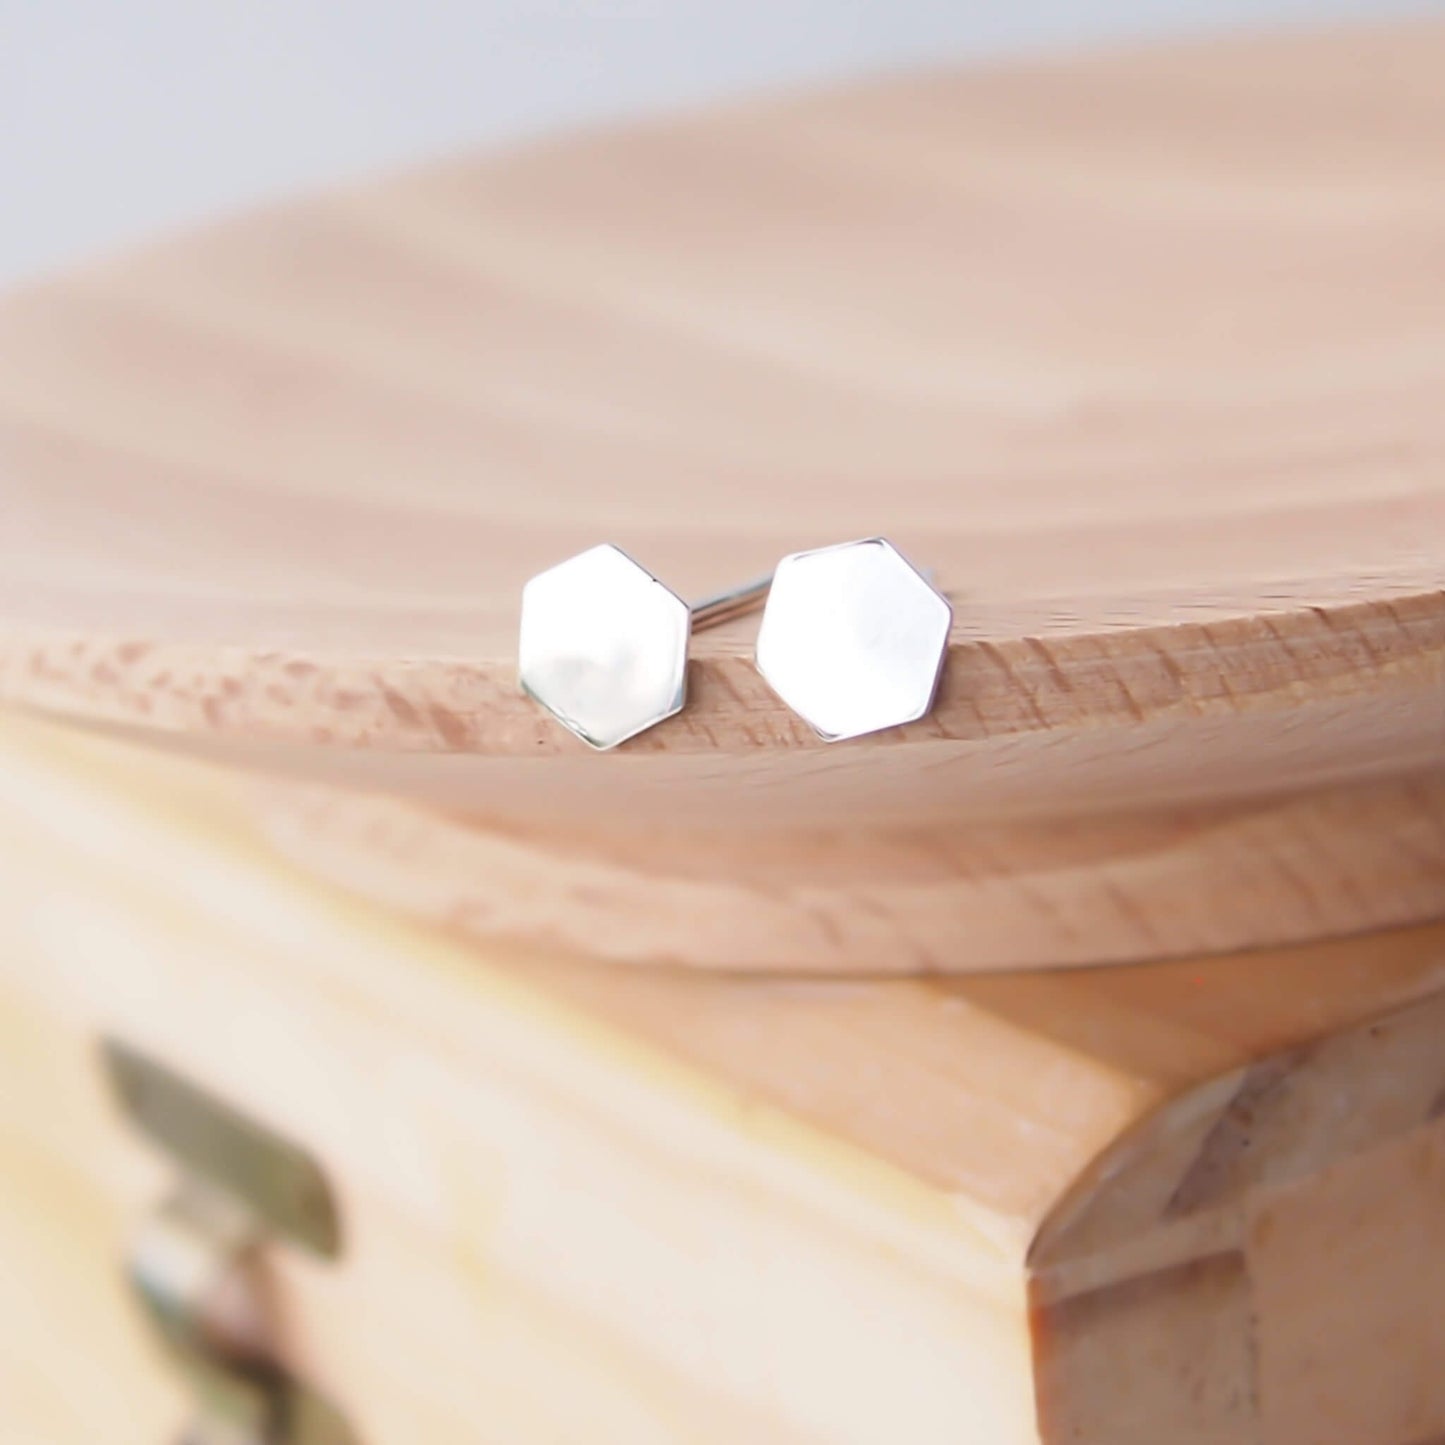 Sterling Silver small stud earrings with an hexagon design. The earrings are small and perfect for wearing in multiple piercings. The earrings are made from Sterling Silver, come with Butterfly Earring backs and are handmade by maram jewellery